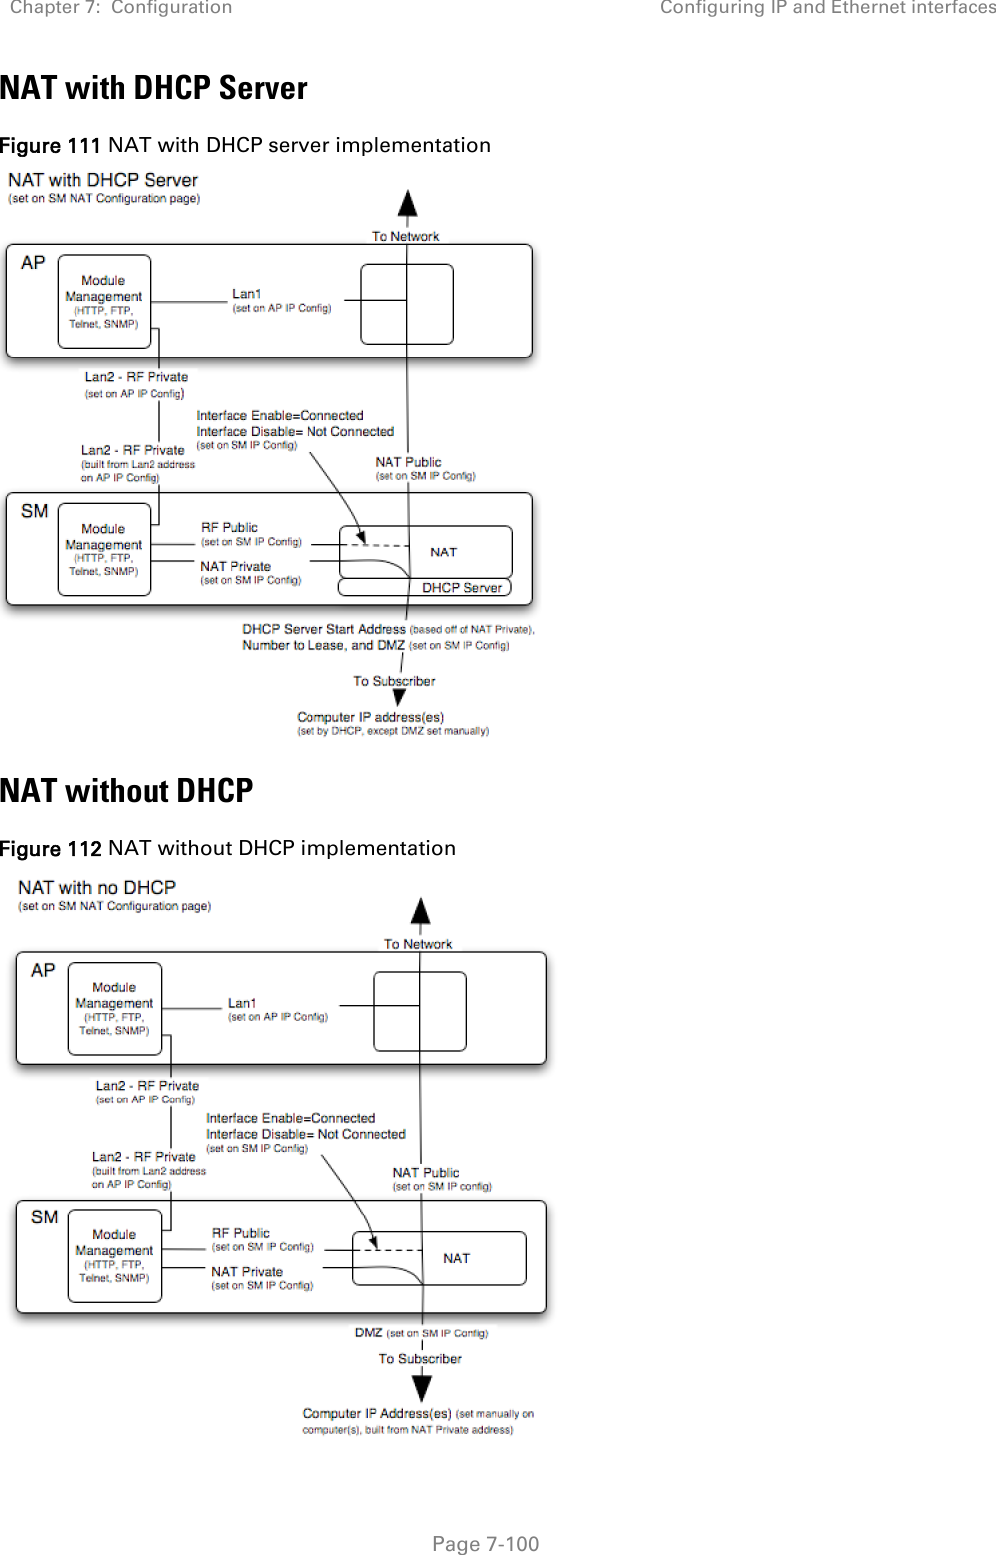 Chapter 7:  Configuration Configuring IP and Ethernet interfaces   Page 7-100 NAT with DHCP Server Figure 111 NAT with DHCP server implementation  NAT without DHCP Figure 112 NAT without DHCP implementation  